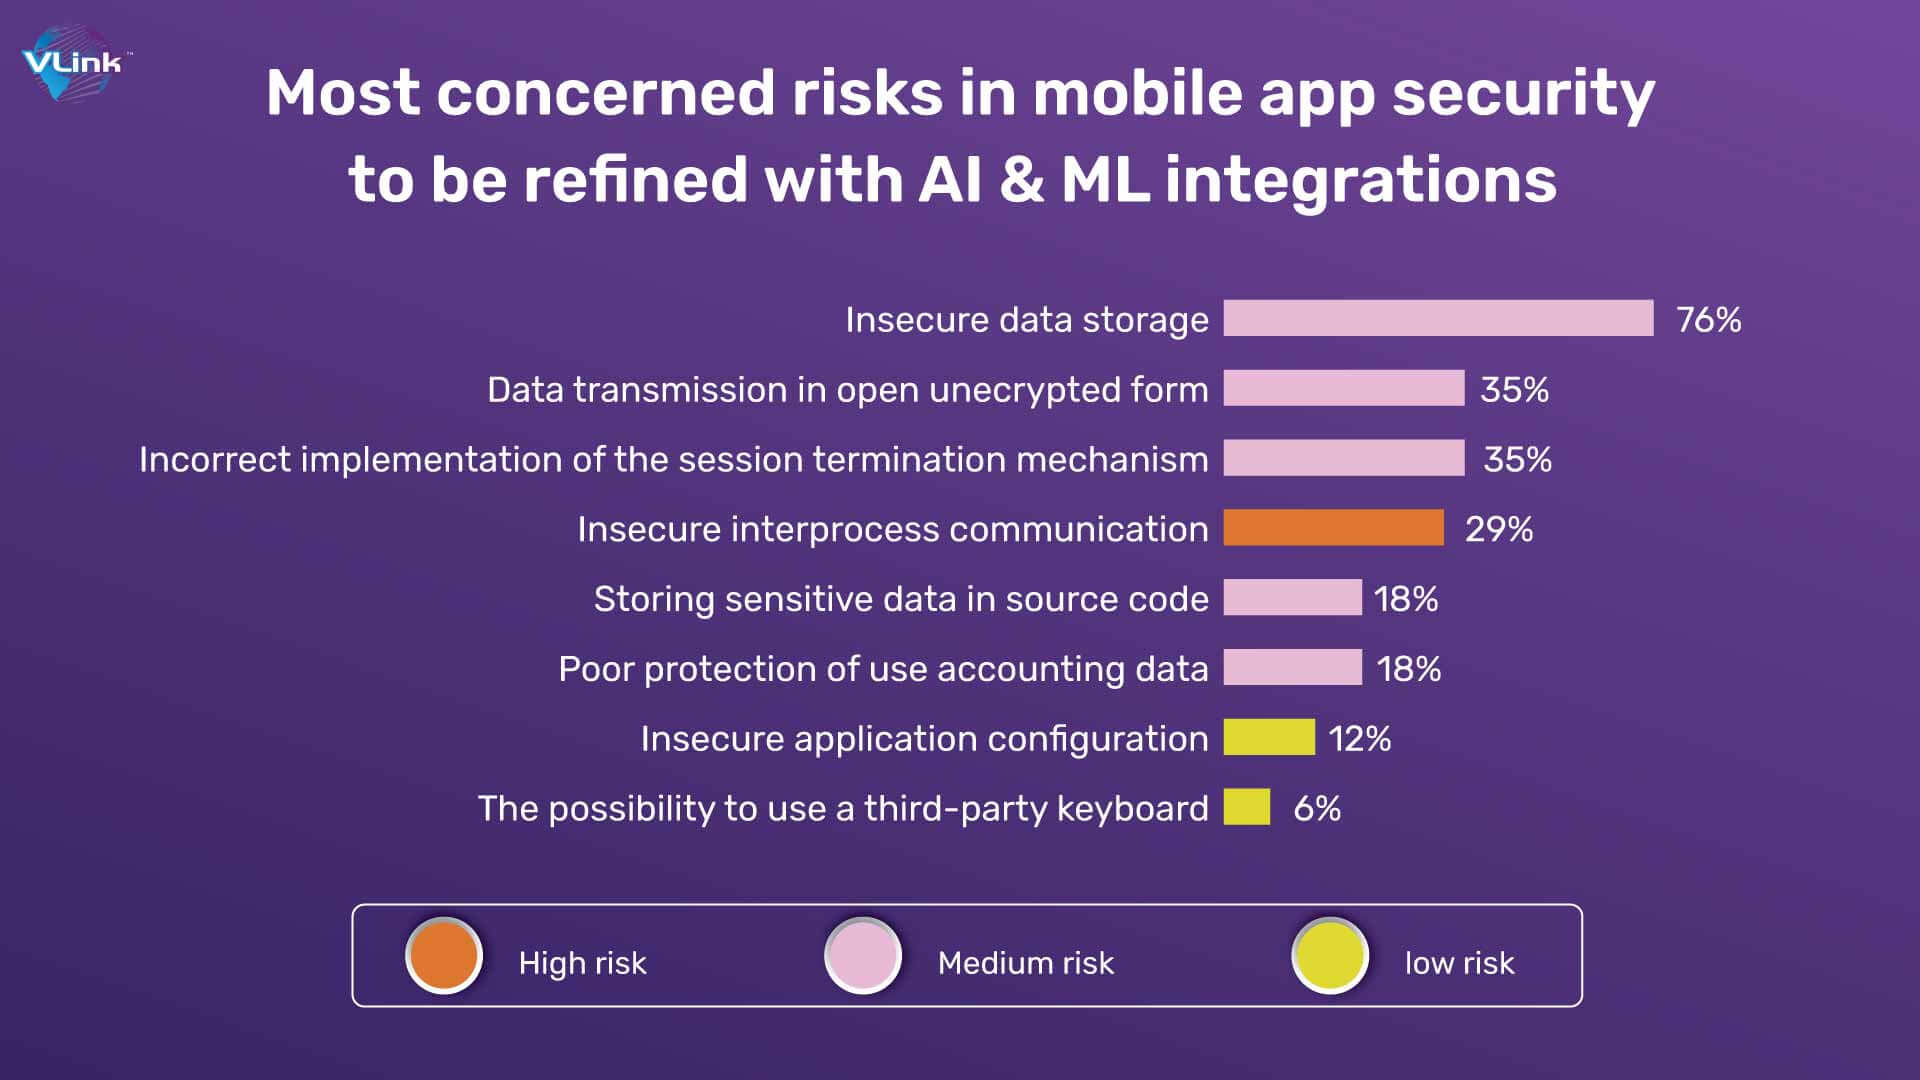 Most concerned risks in mobile app security to be refined with AI & ML integrations